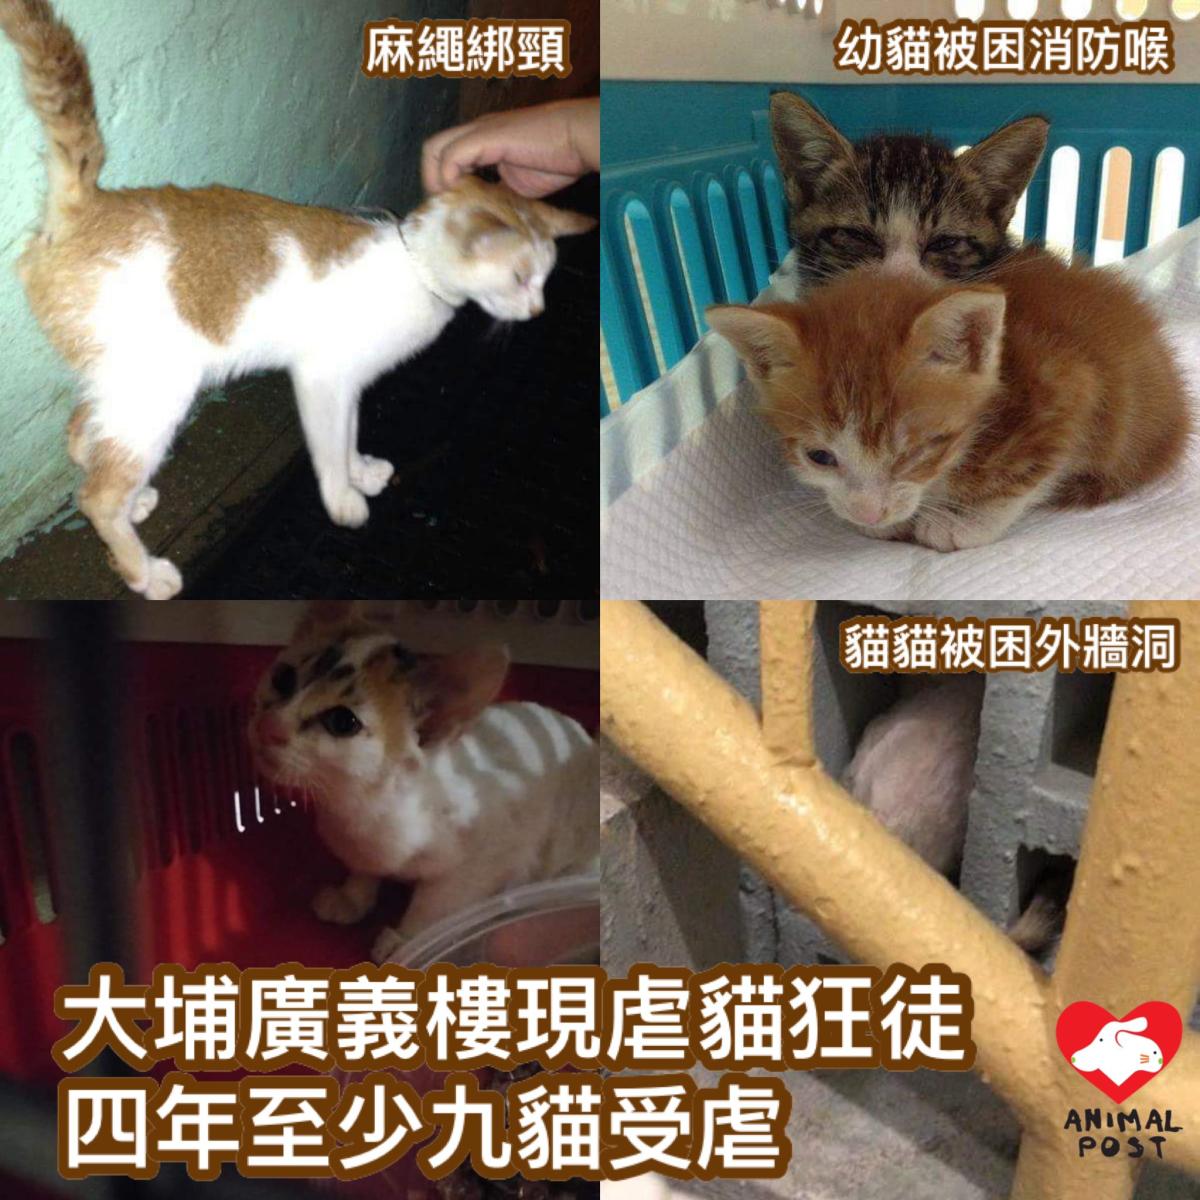 Catch the Cat Abusers in Kwong Yee Building: Seeking Justice for Abused Cats in Tai Po, Hong Kong